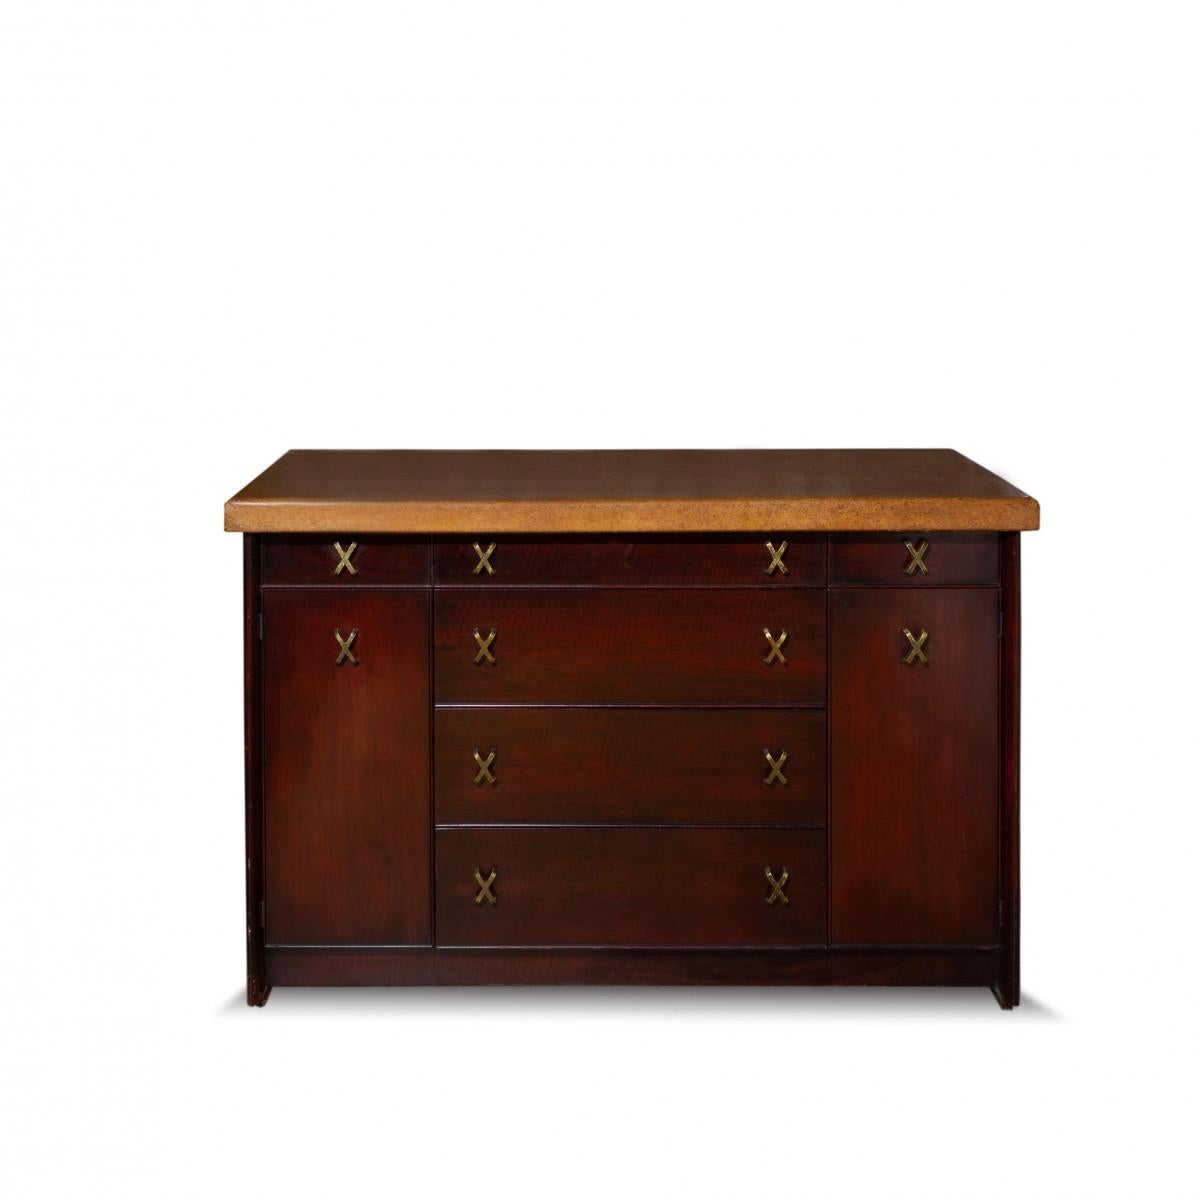 A mahogany sideboard with cork top and brass 